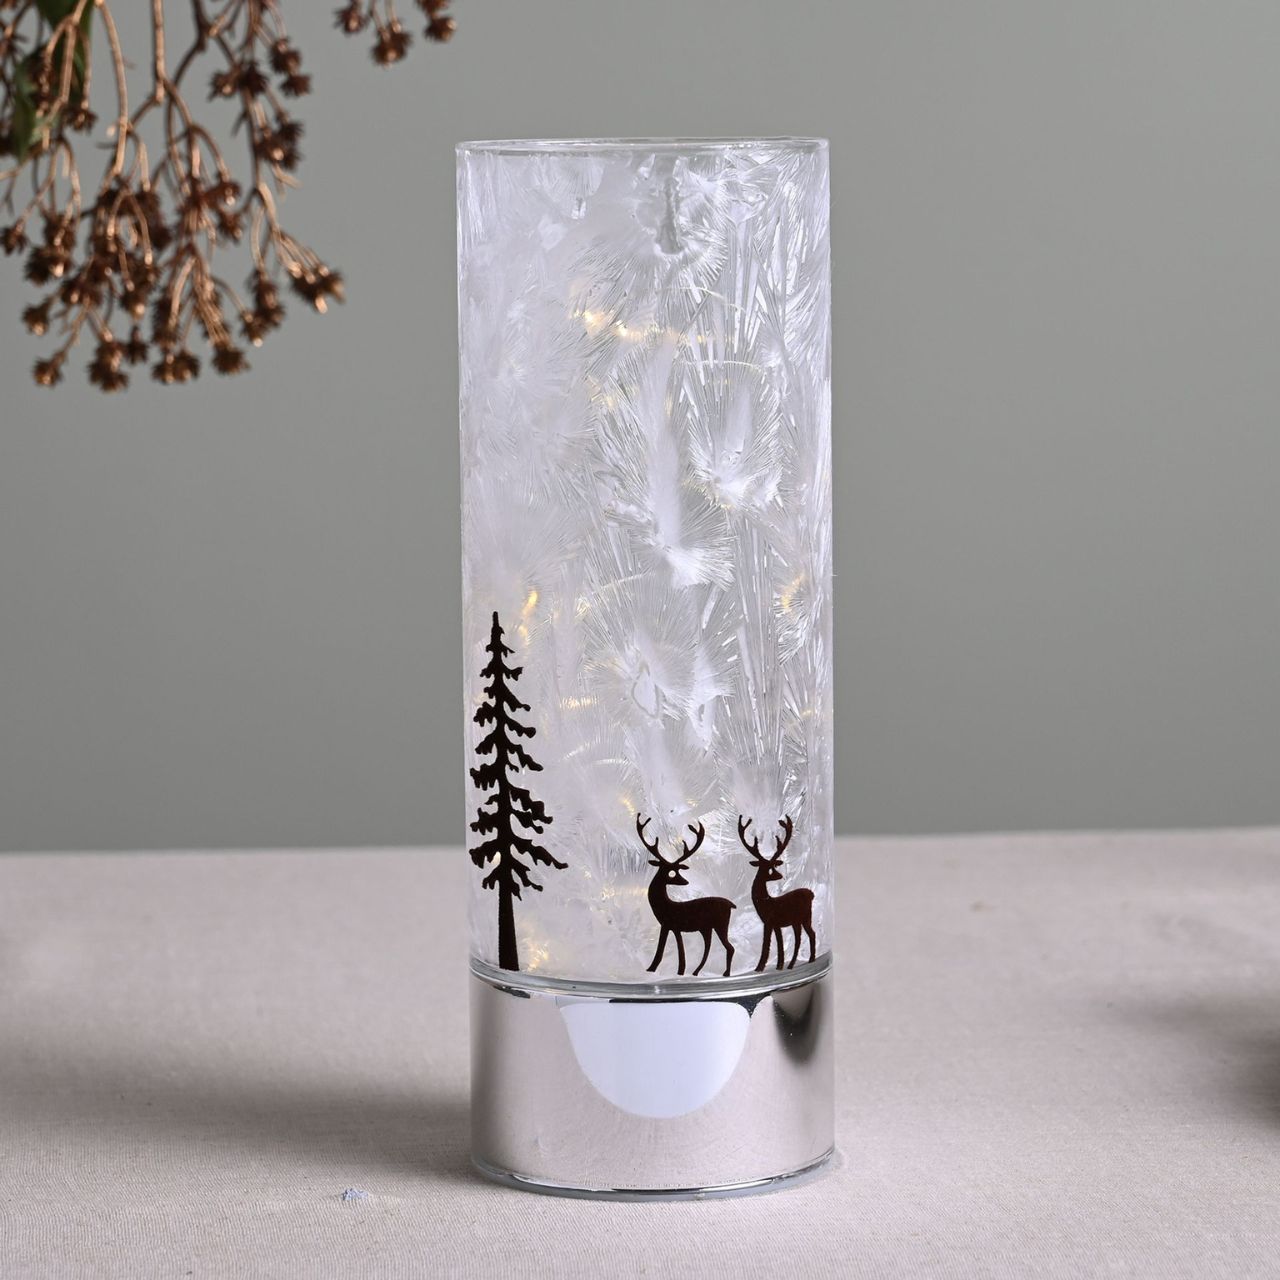 Large Reindeer with Tree Christmas LED Light Tube  A large reindeer with tree LED light tube.  This illuminating decoration is a delightful twist on the traditional this Christmas.